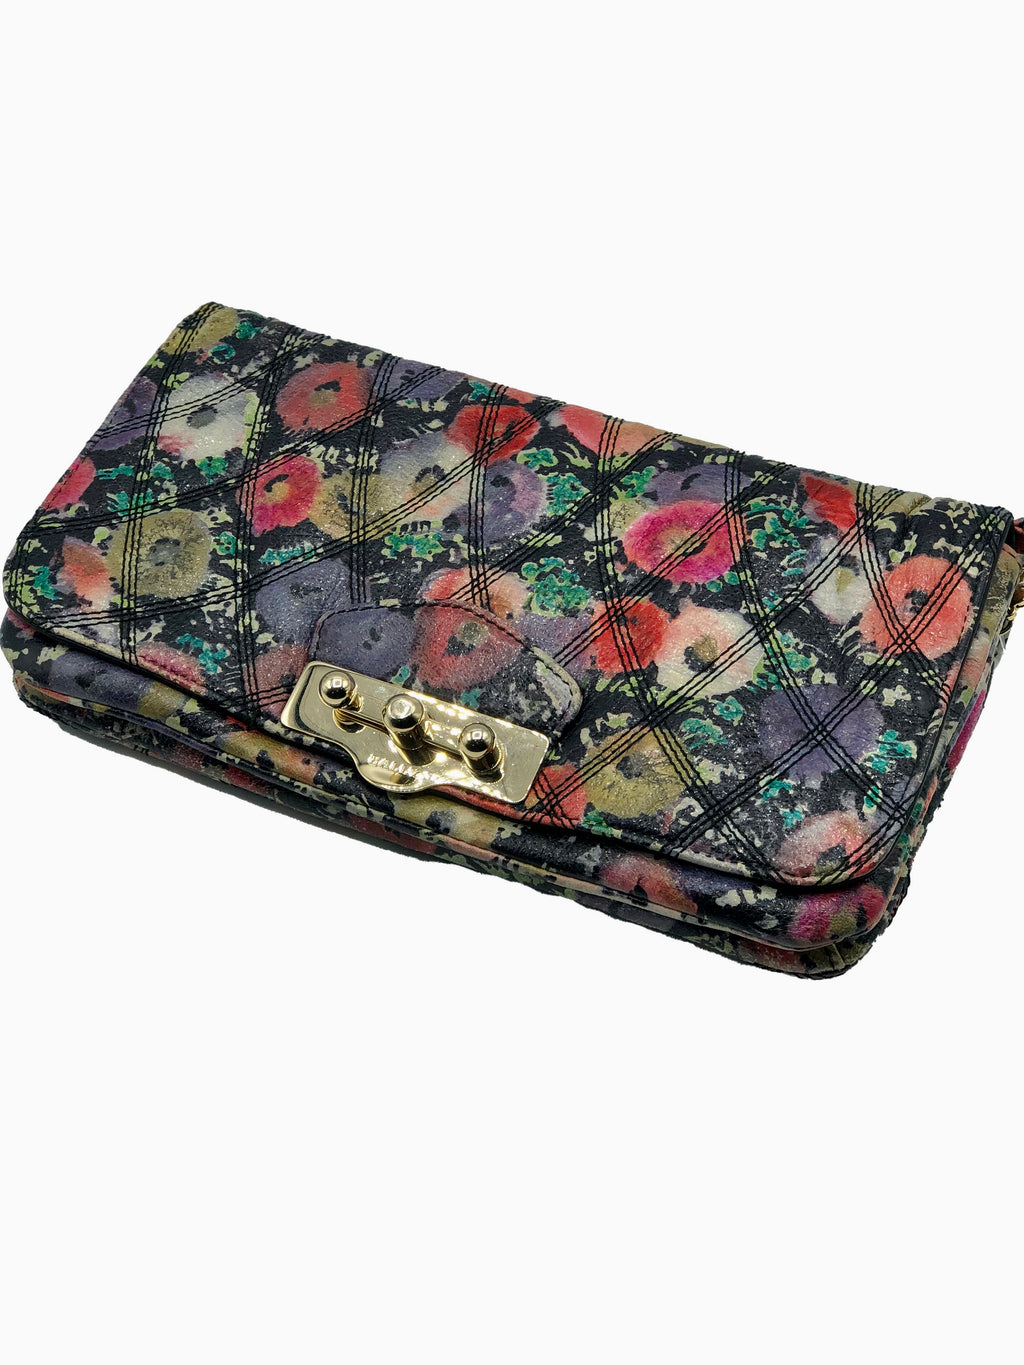 Bally Leather Quilted Floral Shoulder Bag FRONT 1 of 5